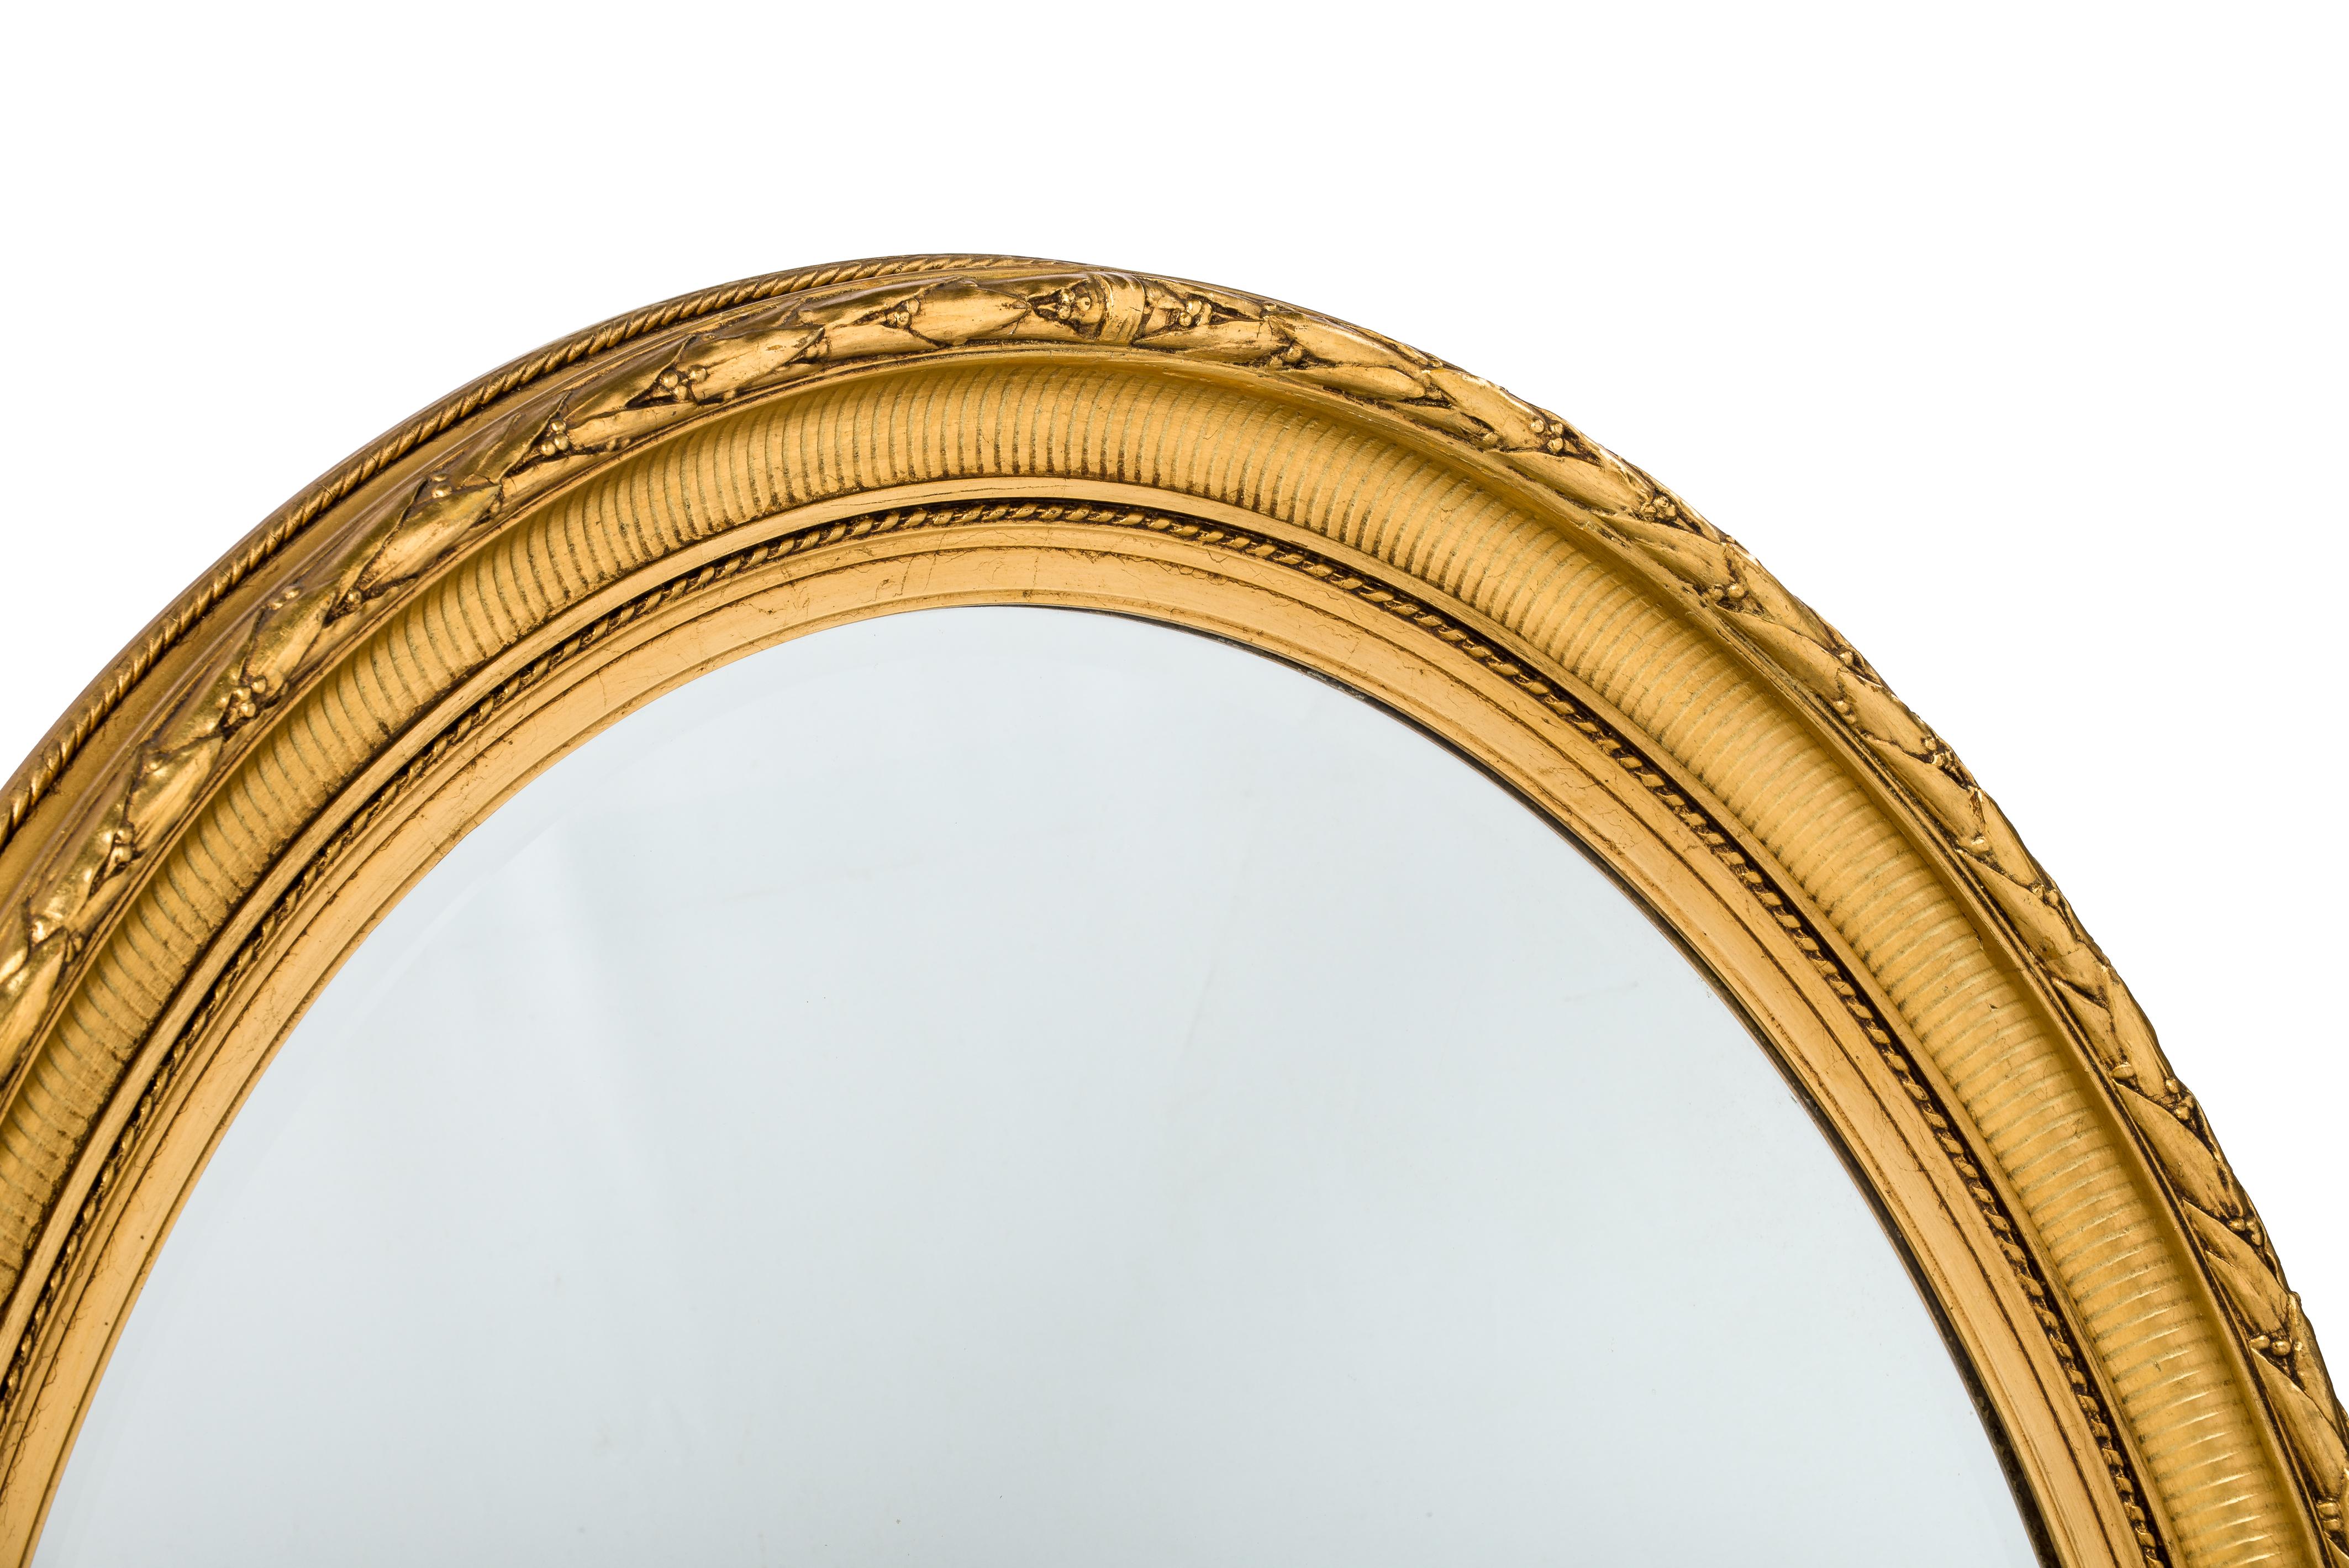 Faceted Antique 19th Century French Oval Gold Leaf Gilt Louis Seize or Empire Mirror For Sale